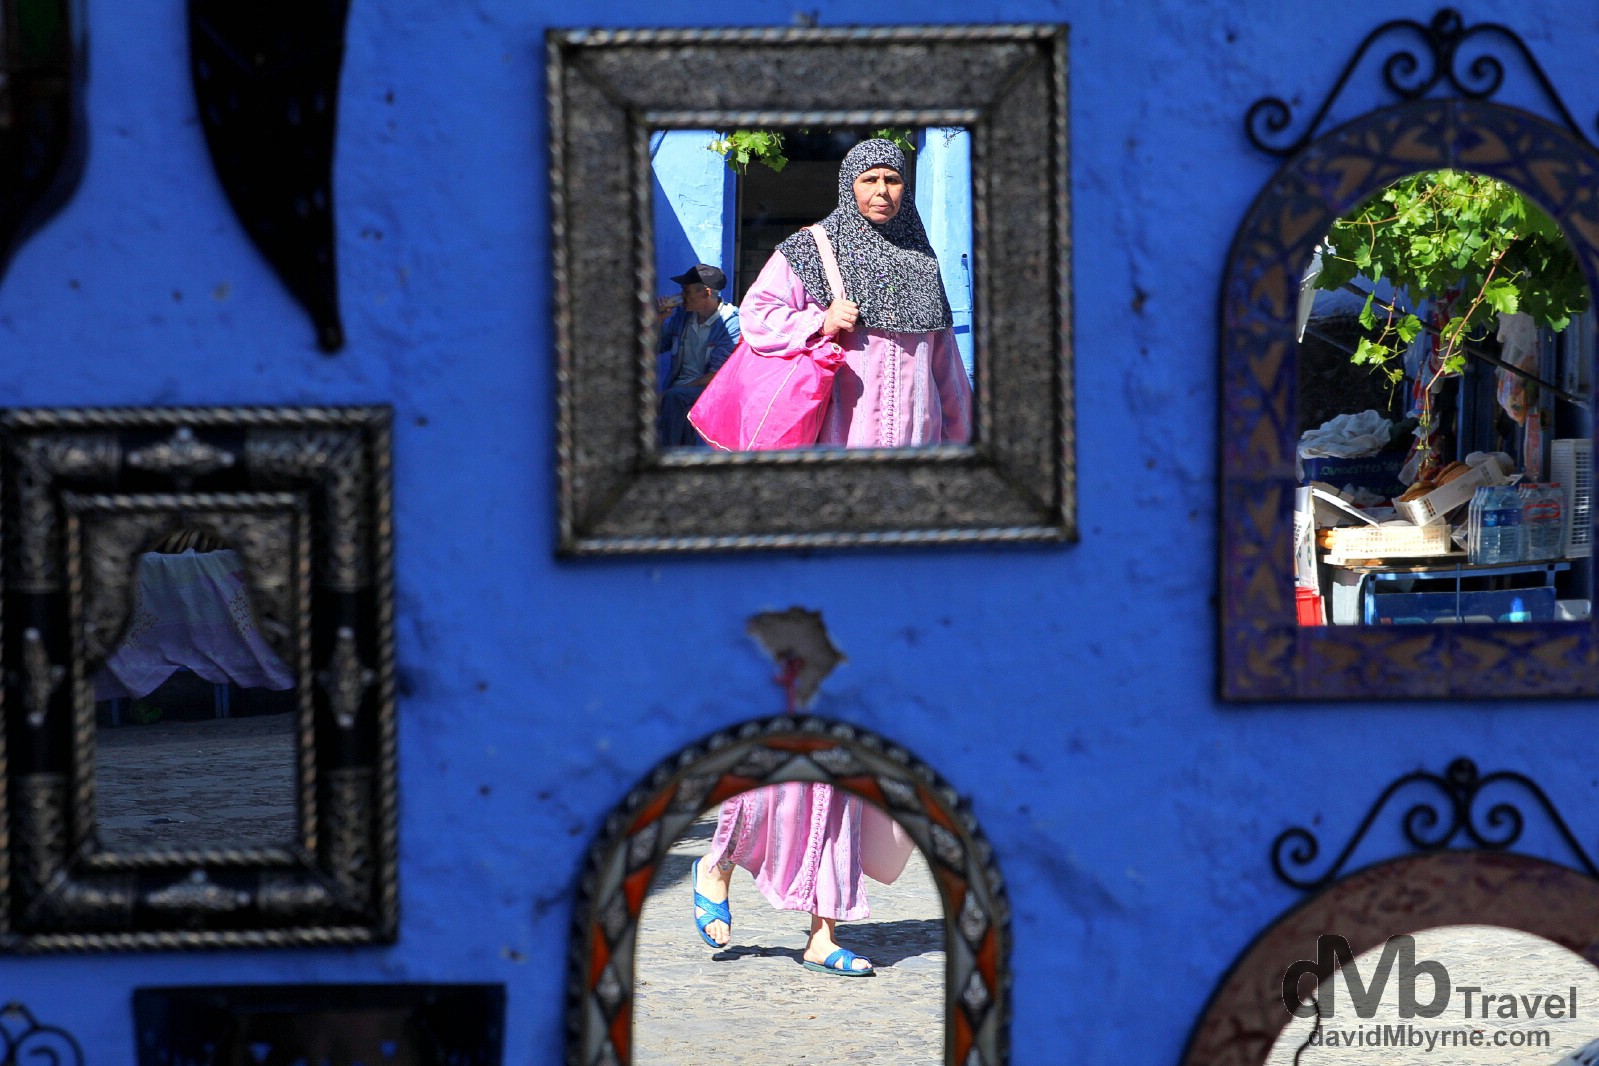 Reflections in mirrors for sale in the lanes of the medina in Chefchaouen, Morocco. June 1st, 2014.